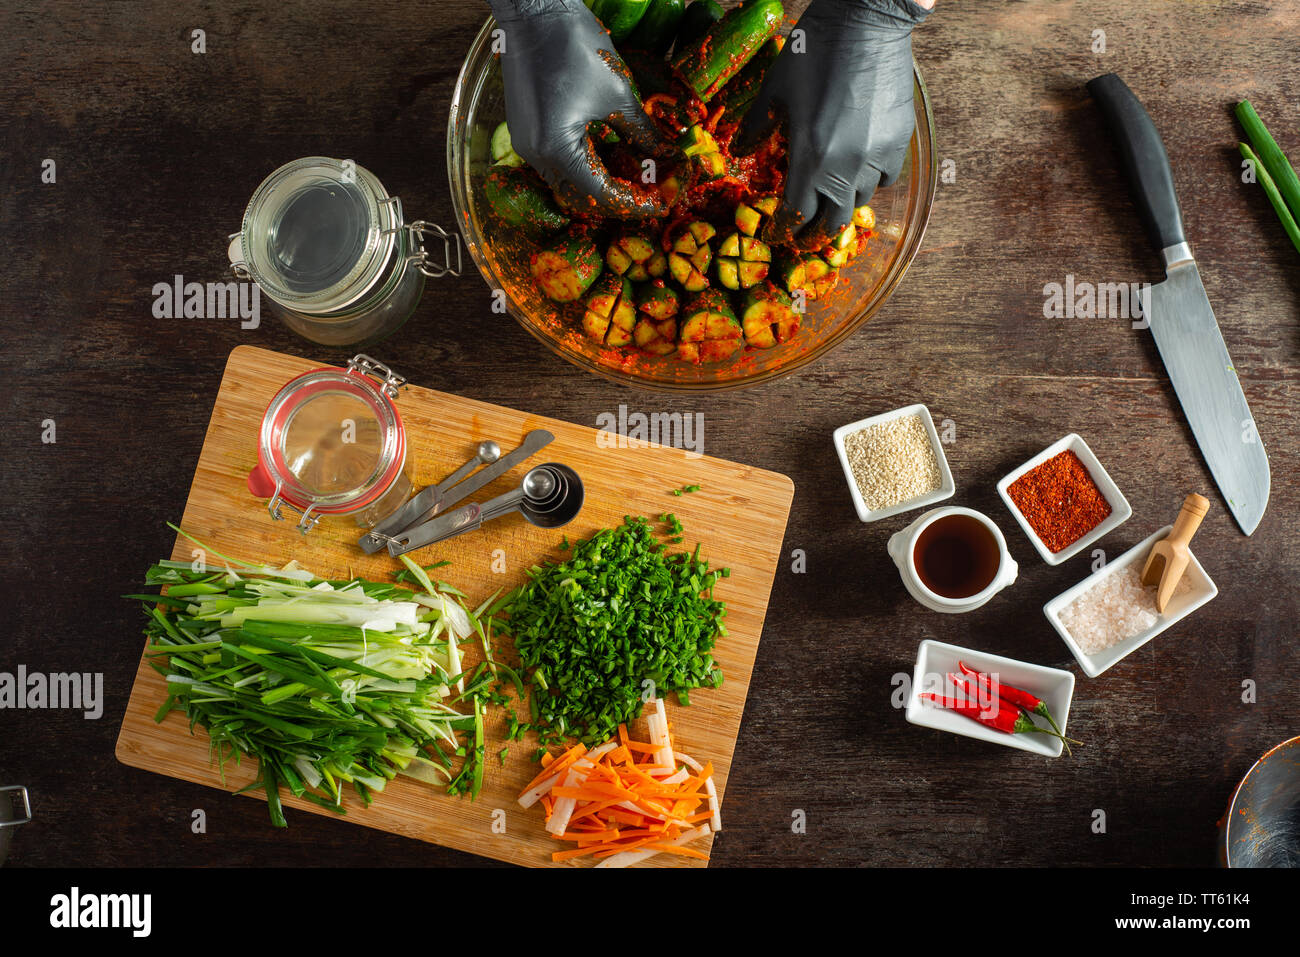 Various food items and ingredients for making spicy kimchee a favorite healthy fermented Korean condiment. Colorful and delicious. Hands preparing. Stock Photo